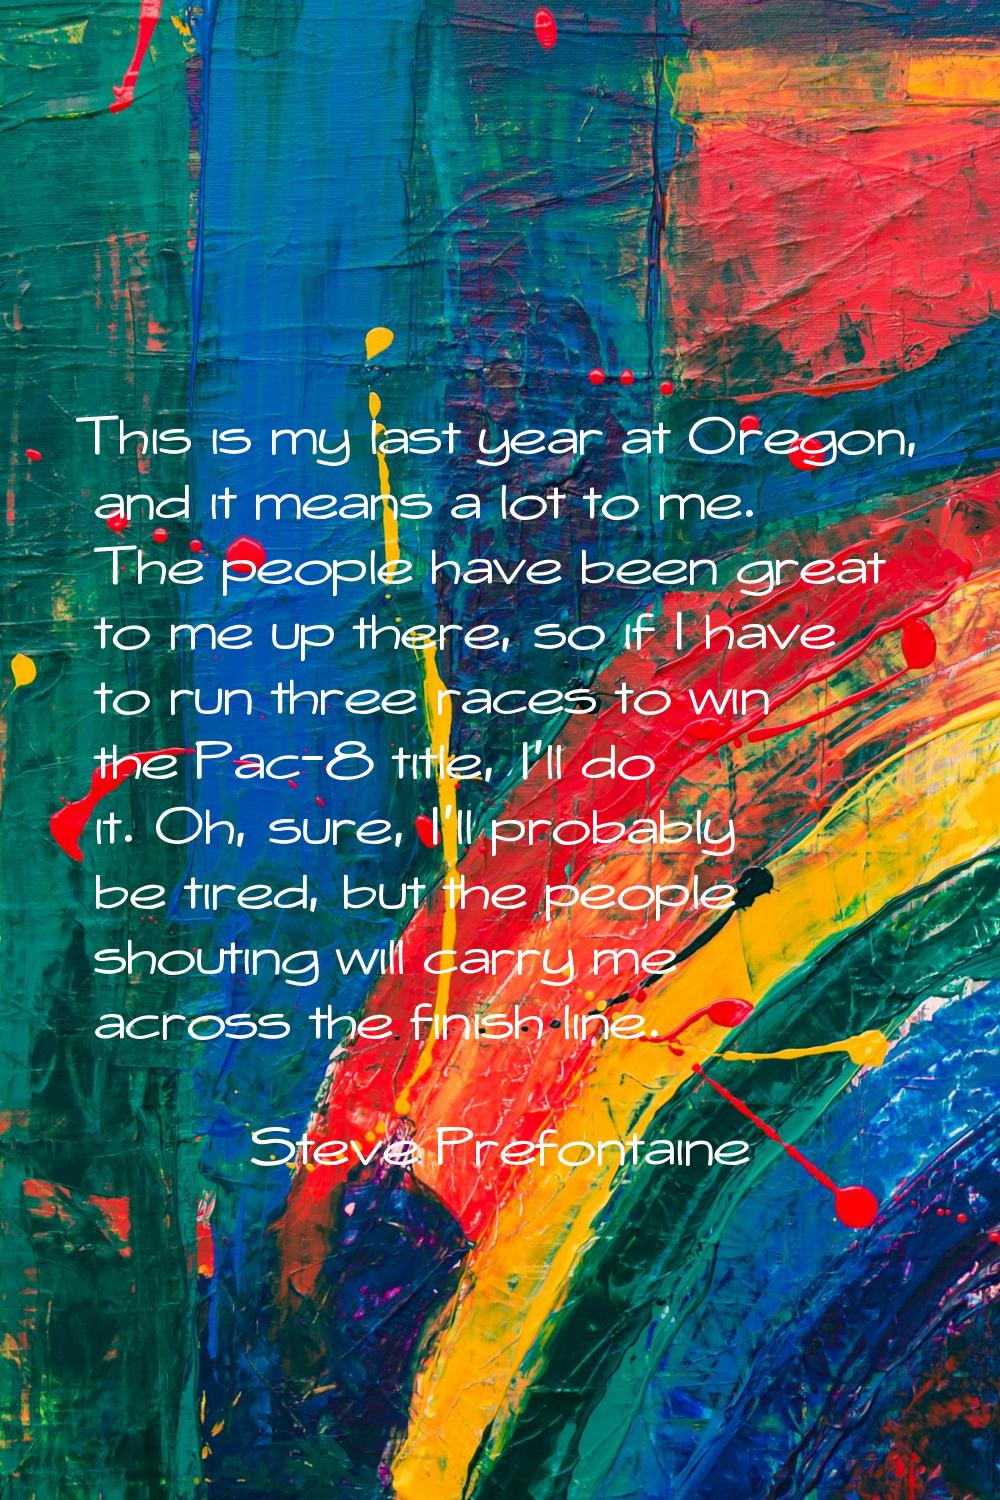 This is my last year at Oregon, and it means a lot to me. The people have been great to me up there